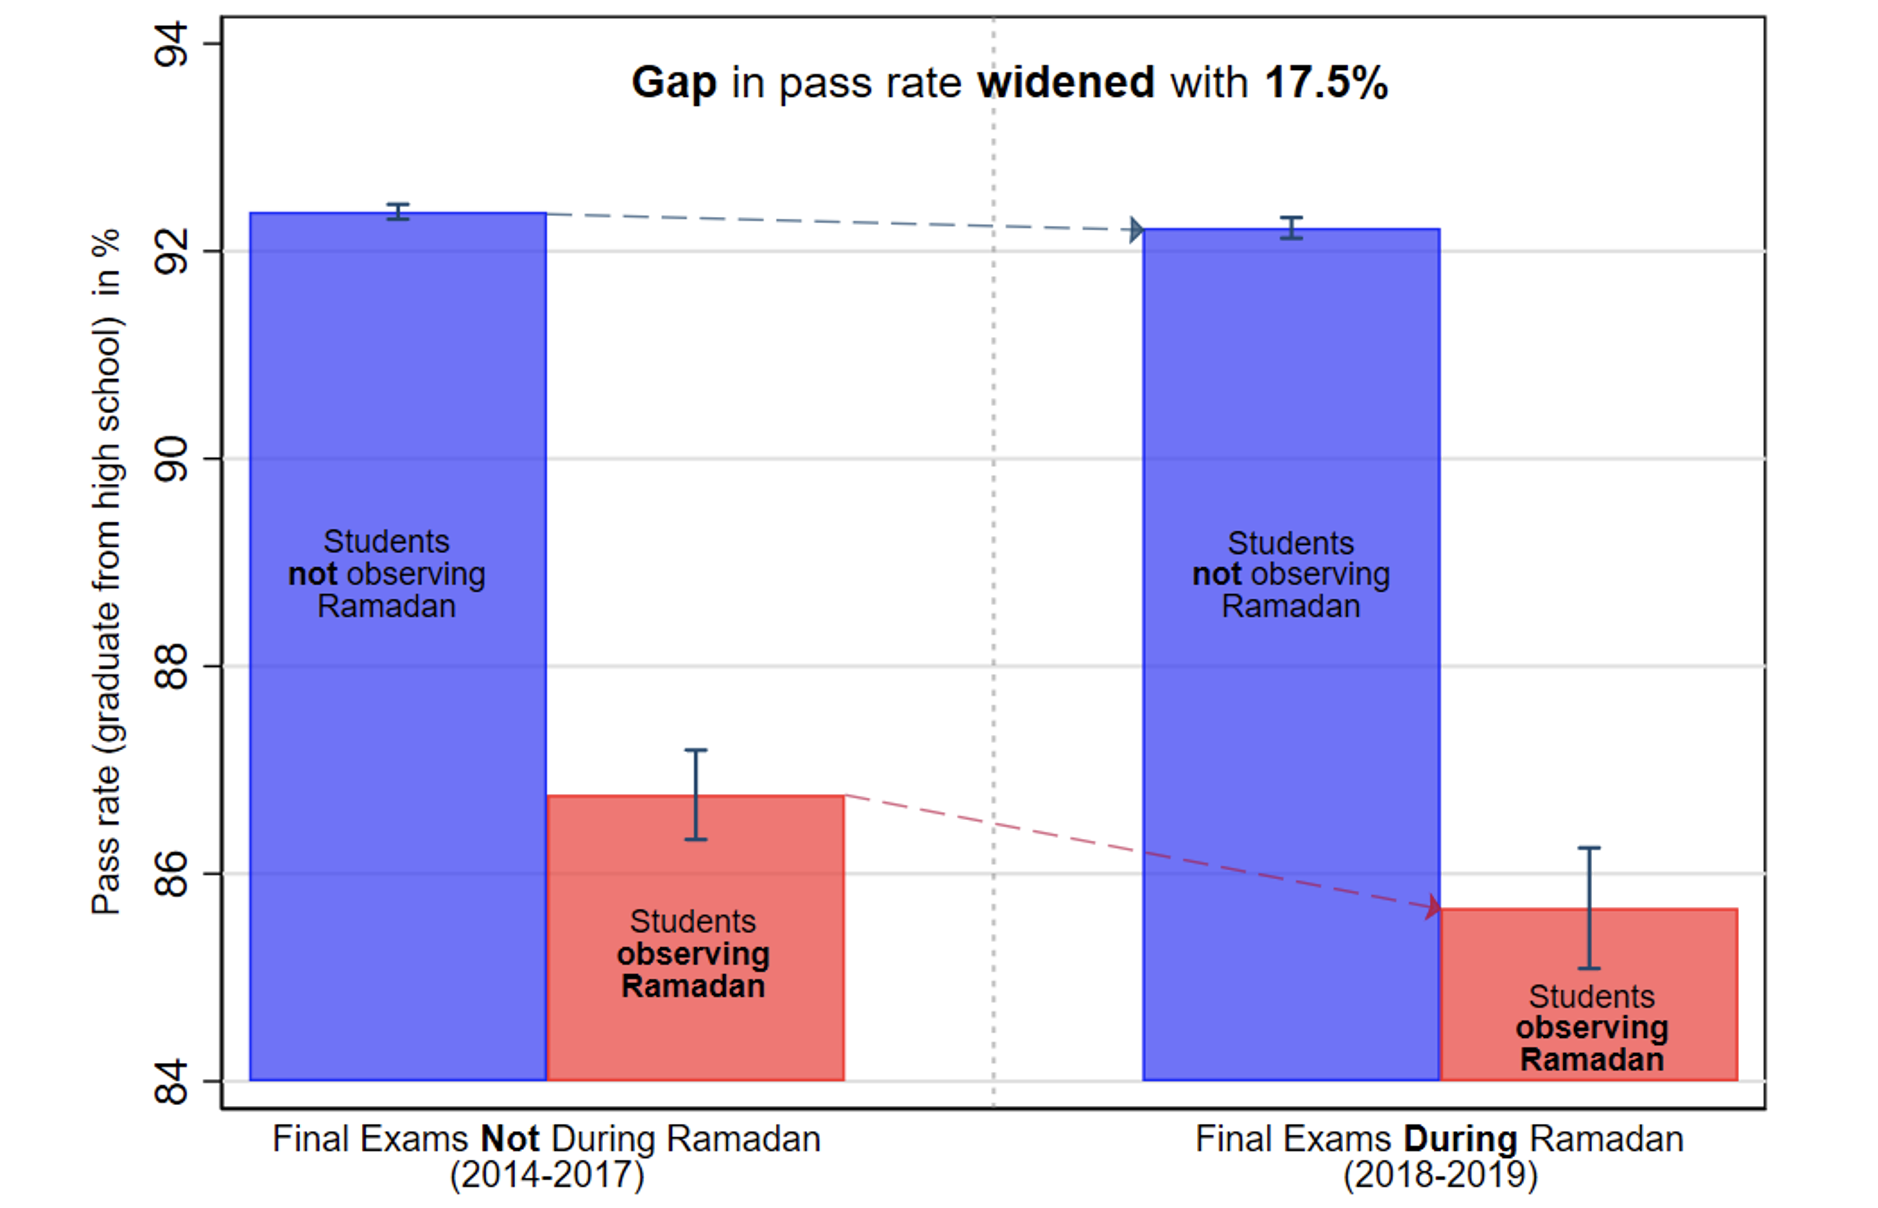 Figure 2 Average pass rate at final exams